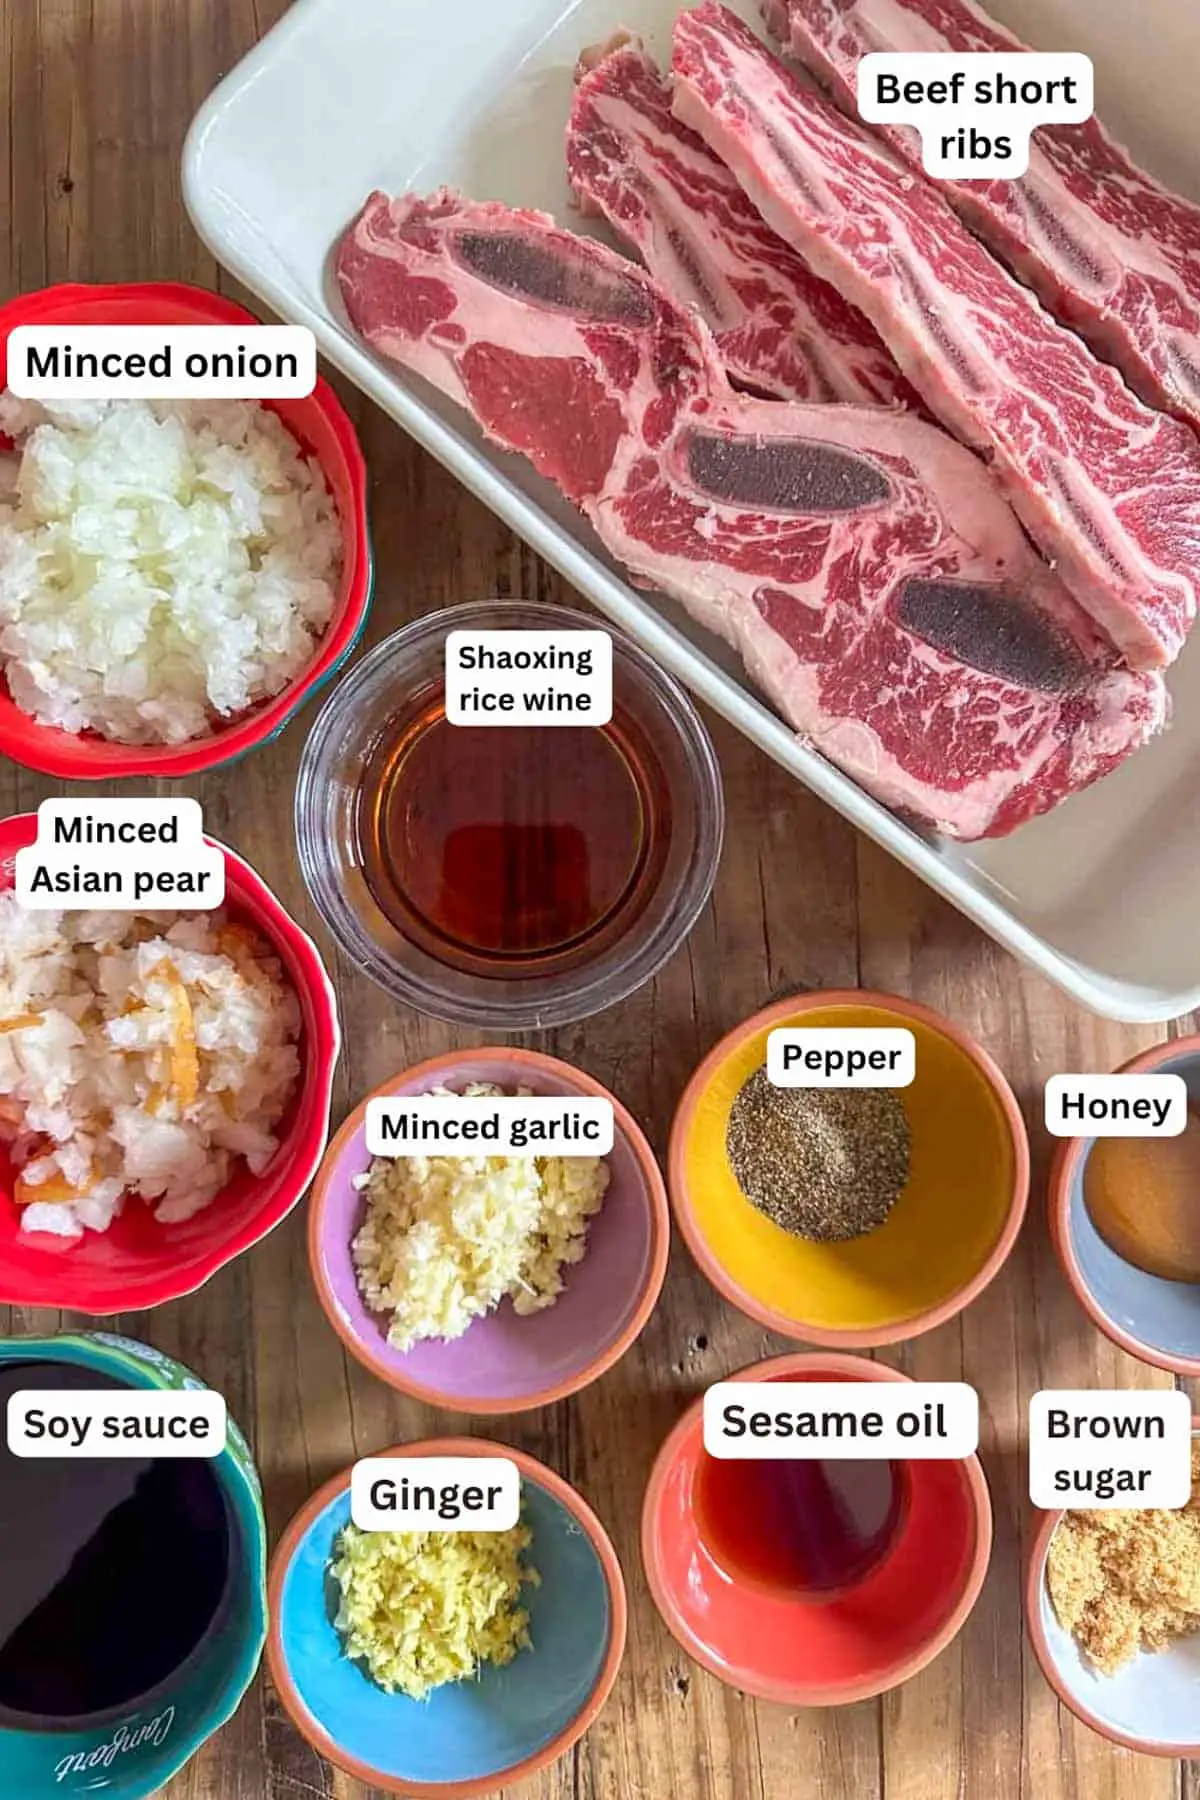 Ingredients for Air Fryer Korean Galbi Short Ribs including beef short ribs, minced onion, minced Asian pear, Shaoxing rice wine, minced garlic, pepper, honey, soy sauce, ginger, sesame oil, and brown sugar.